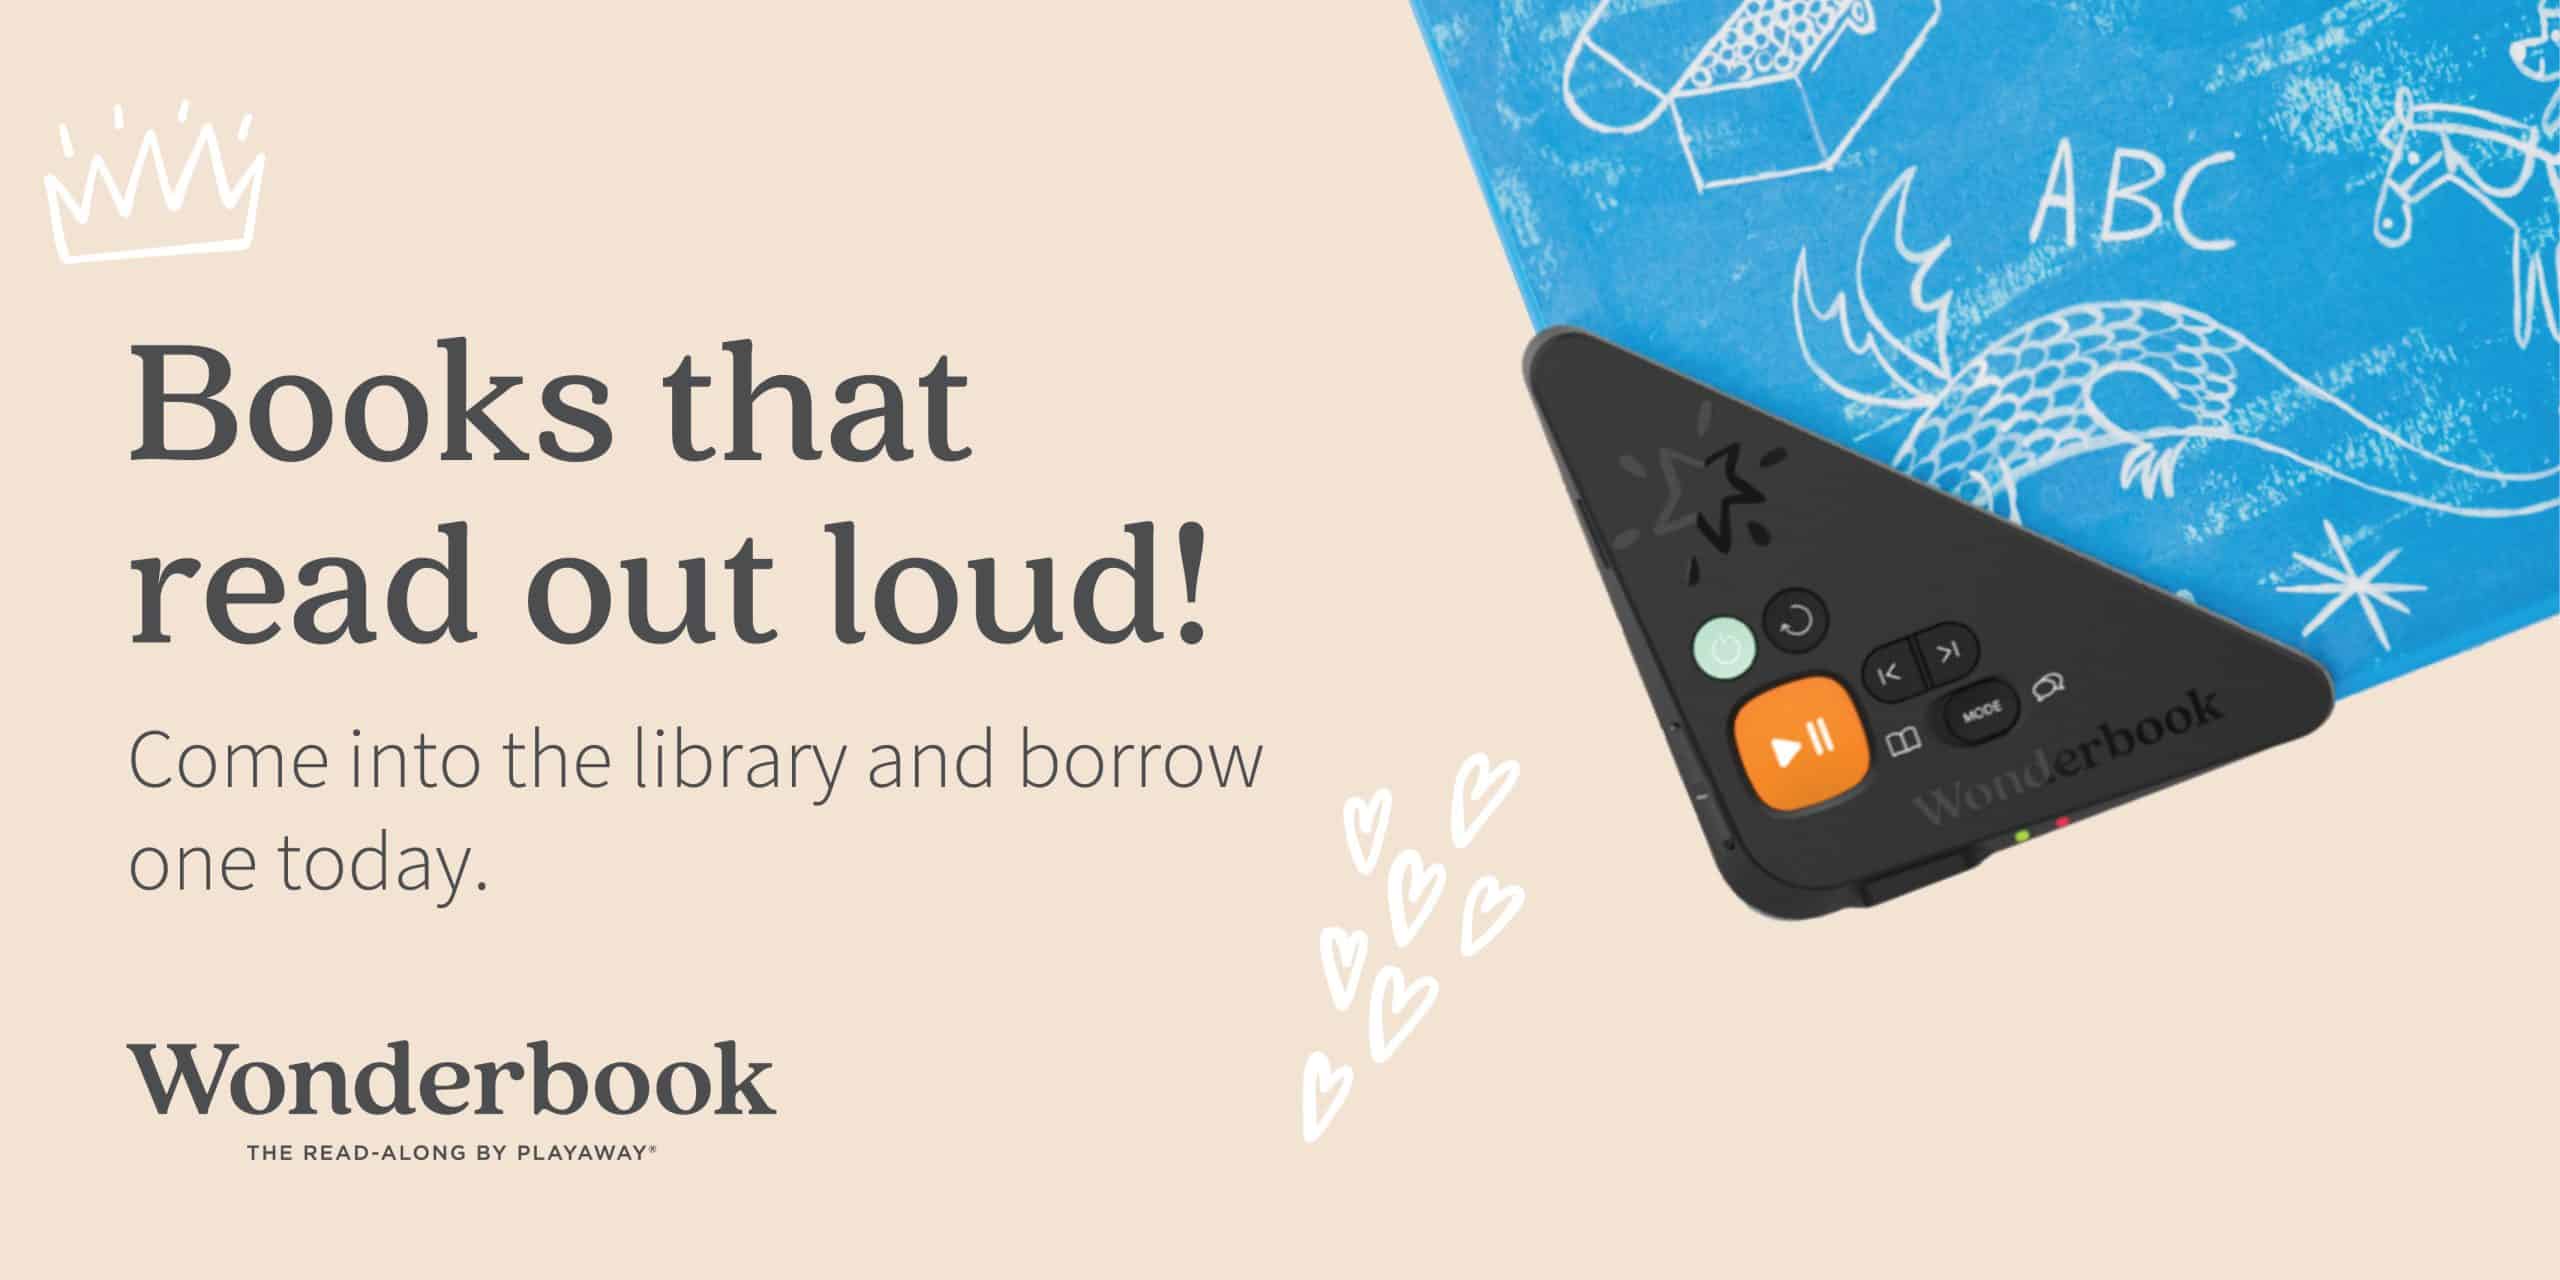 Books that read out loud!